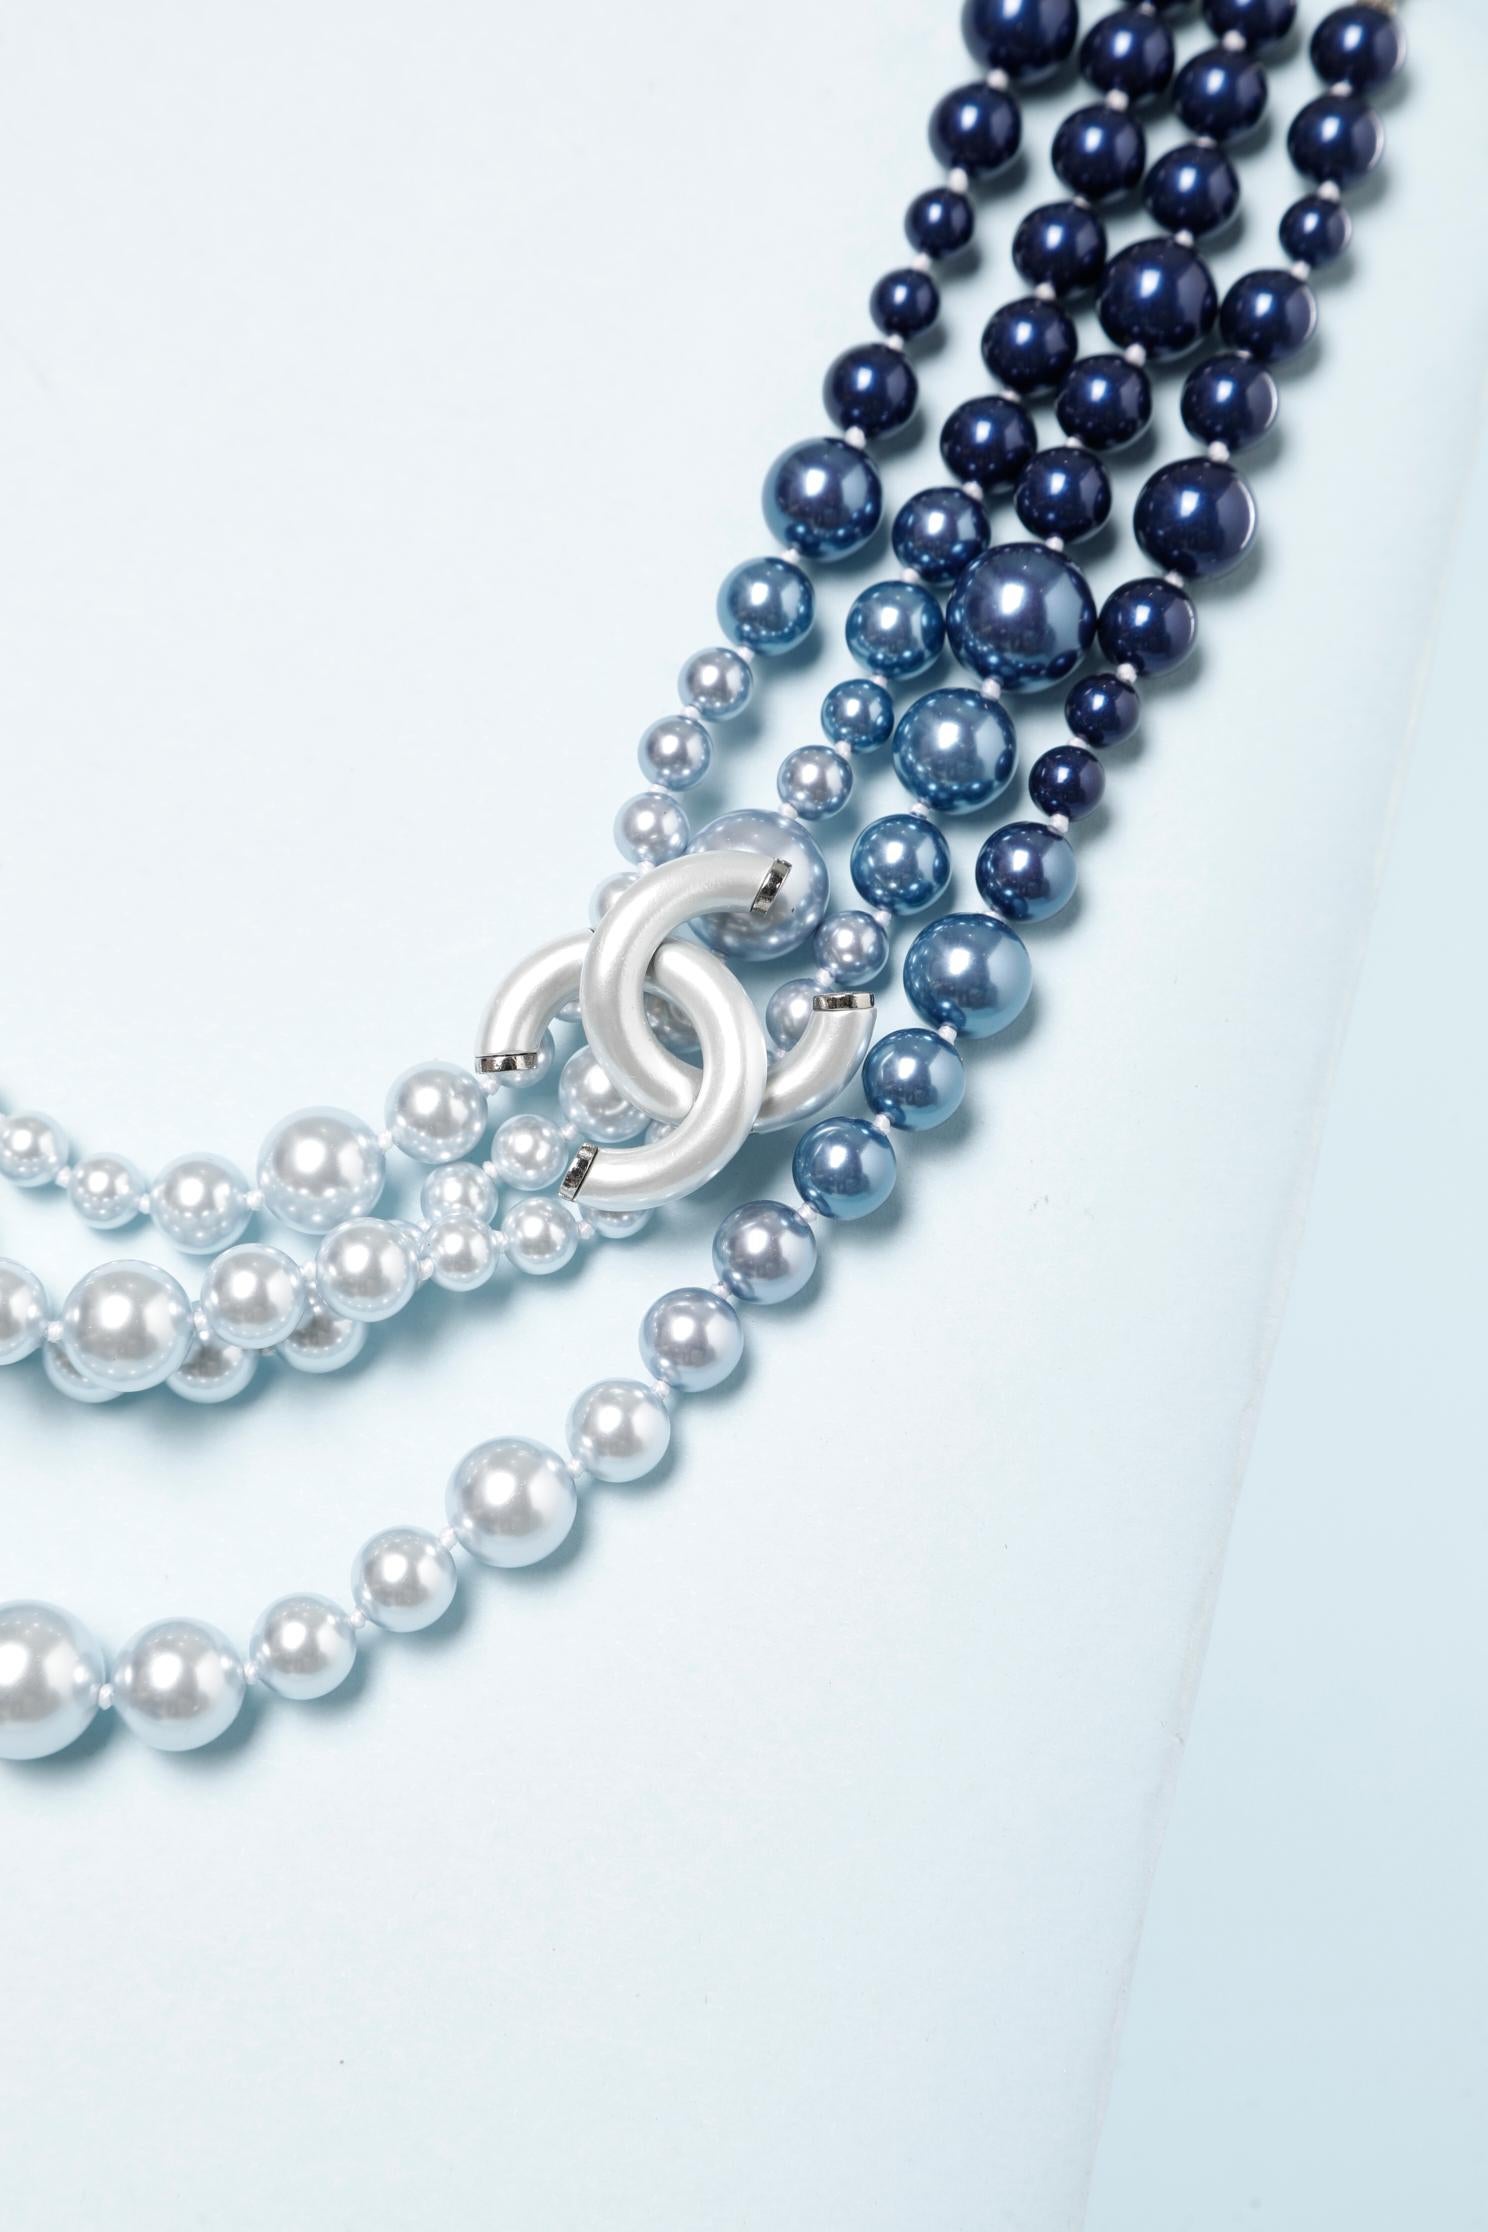 Multi-strand neckless in a blue shading and 